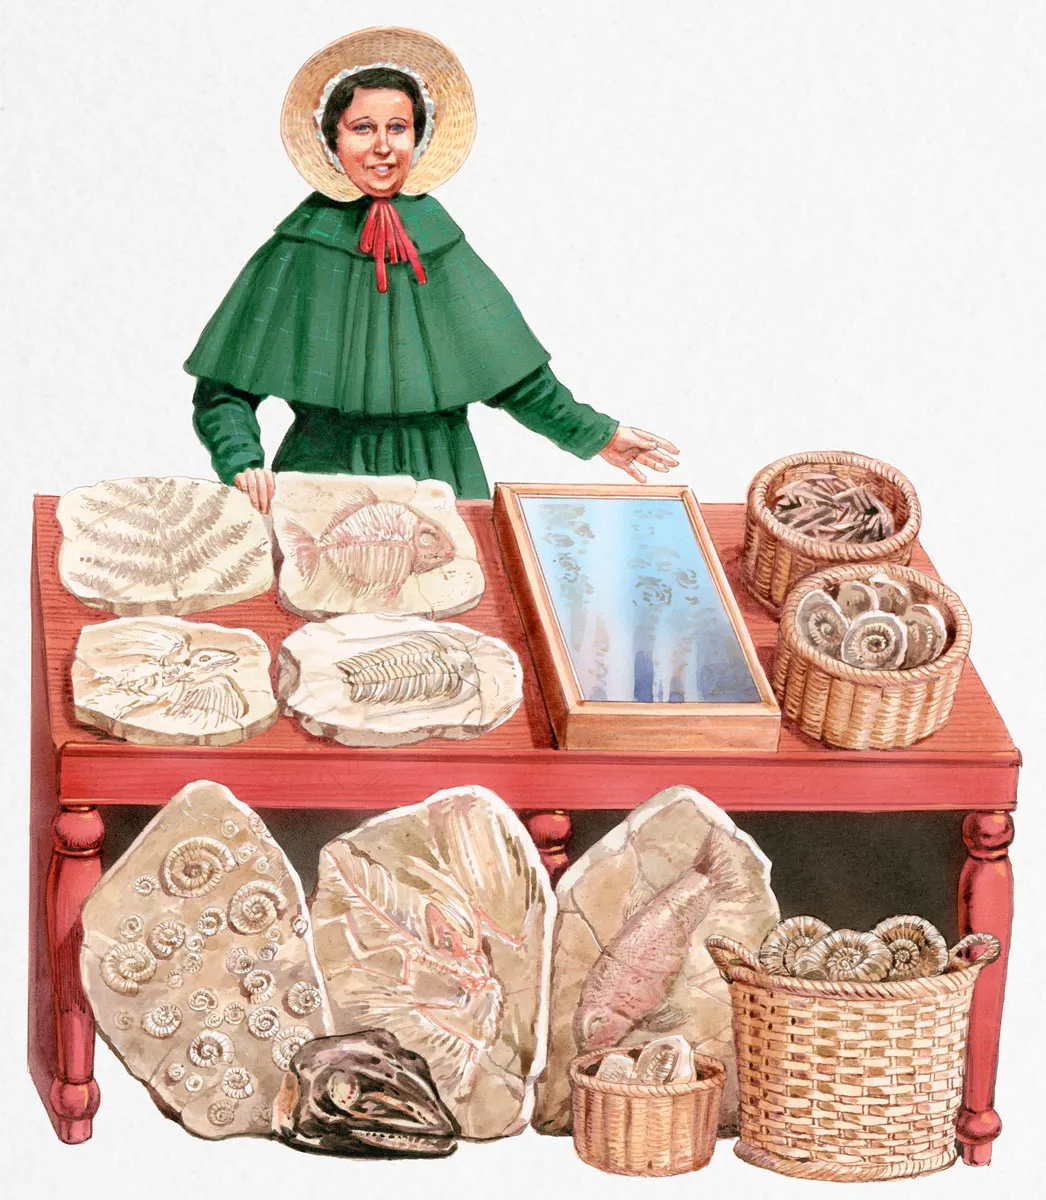 Mary Anning illustration, Getty